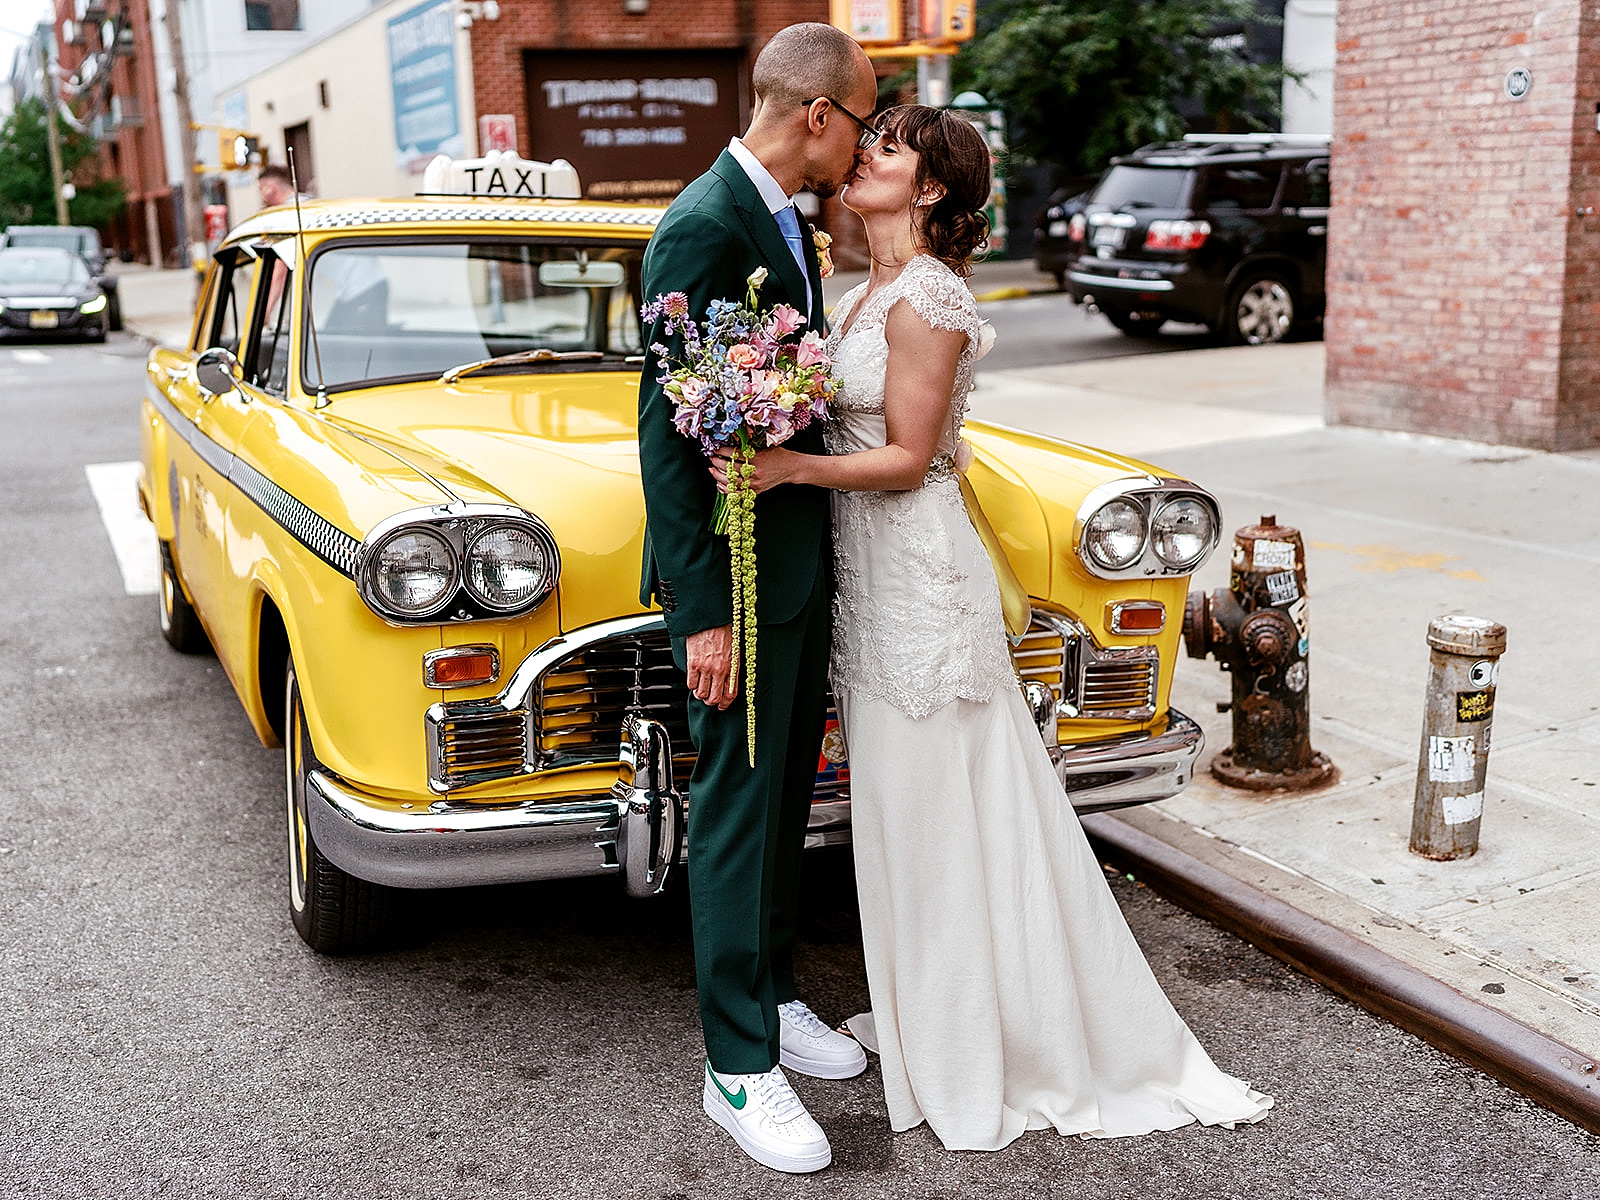 Shot of the bride and groom sharing a kiss in front of an old taxicab. 